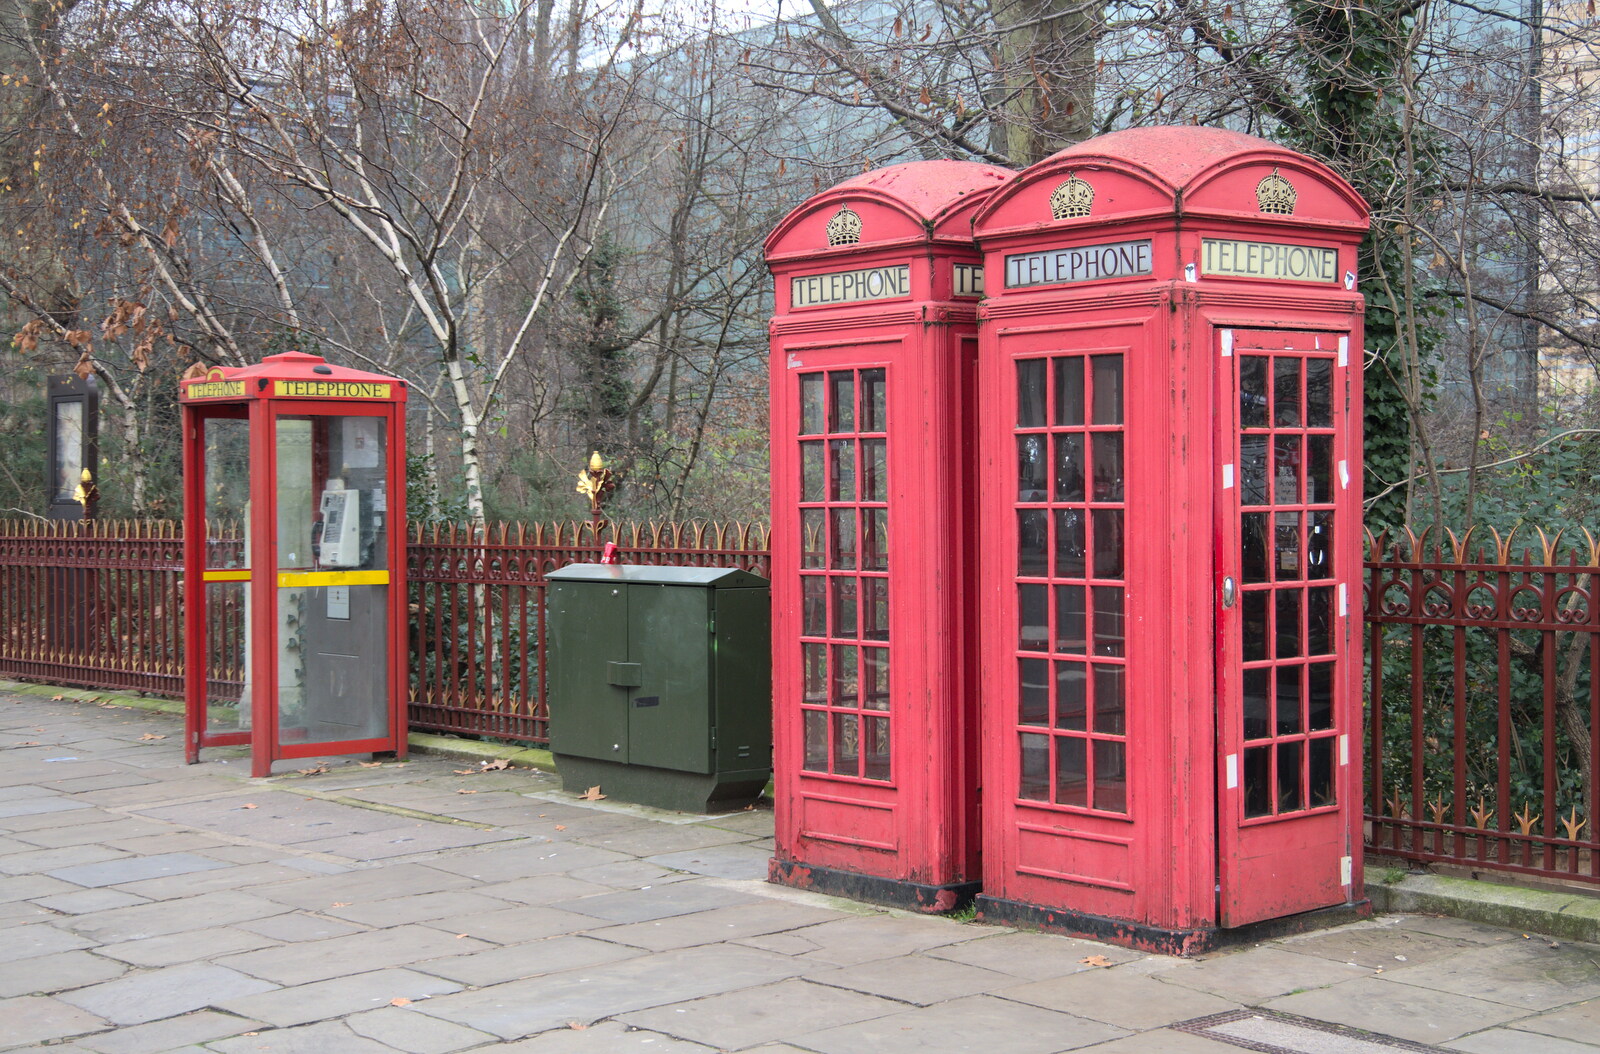 A pair of rarer K2 phone boxes from A Trip to the Natural History Museum, Kensington, London - 15th January 2022